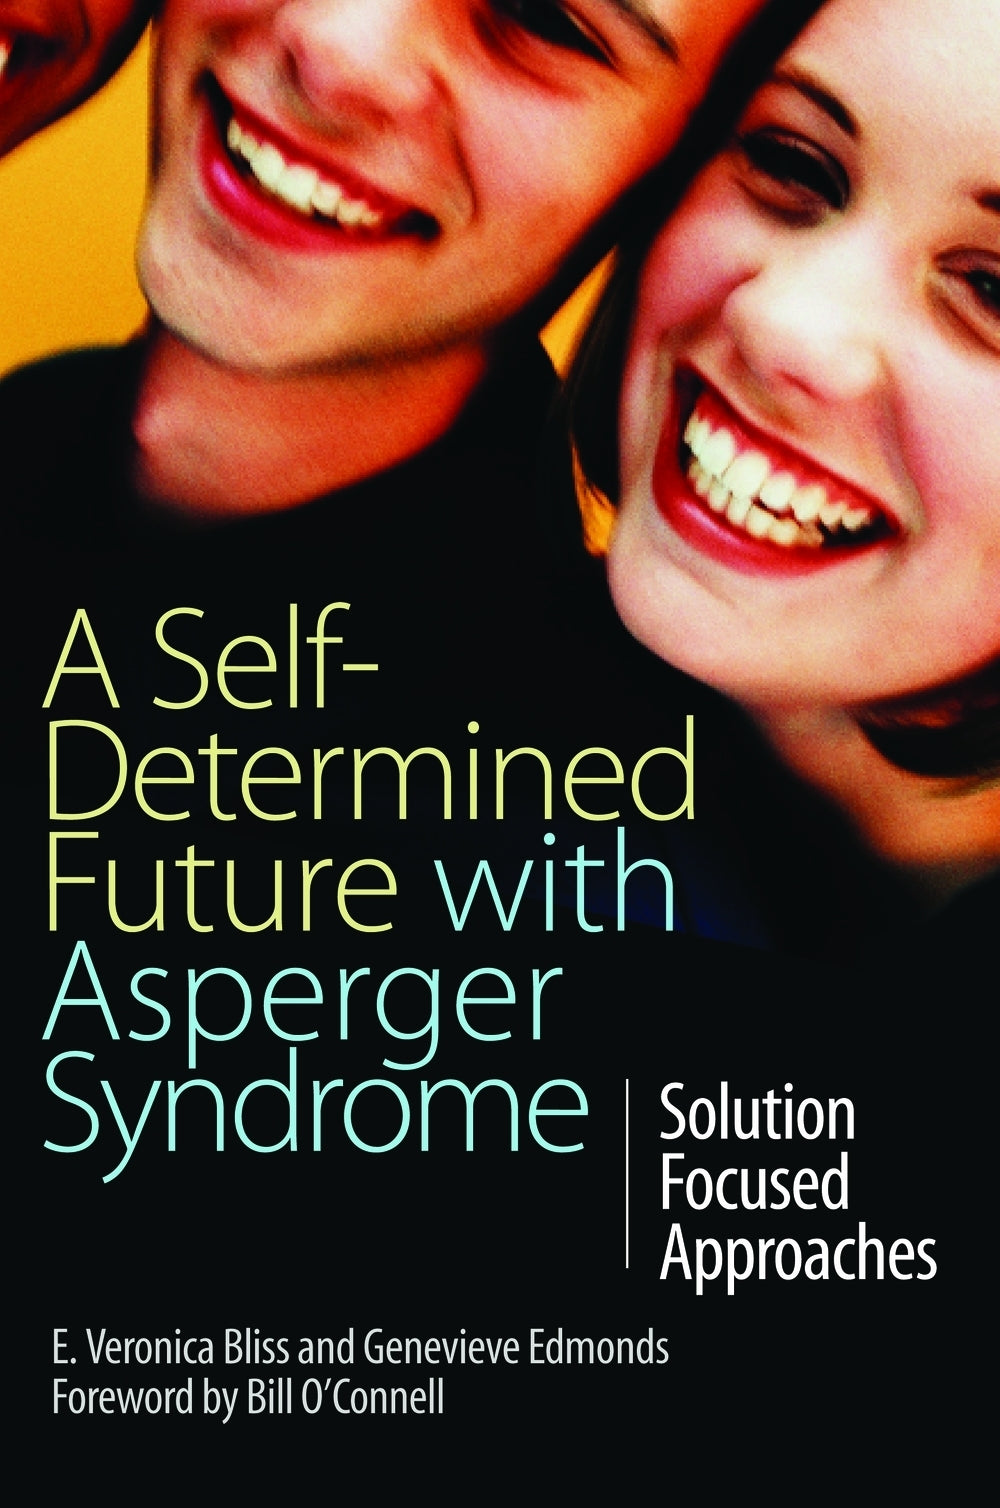 A Self-Determined Future with Asperger Syndrome by E Veronica Bliss, Bill O'Connell, Genevieve Edmonds